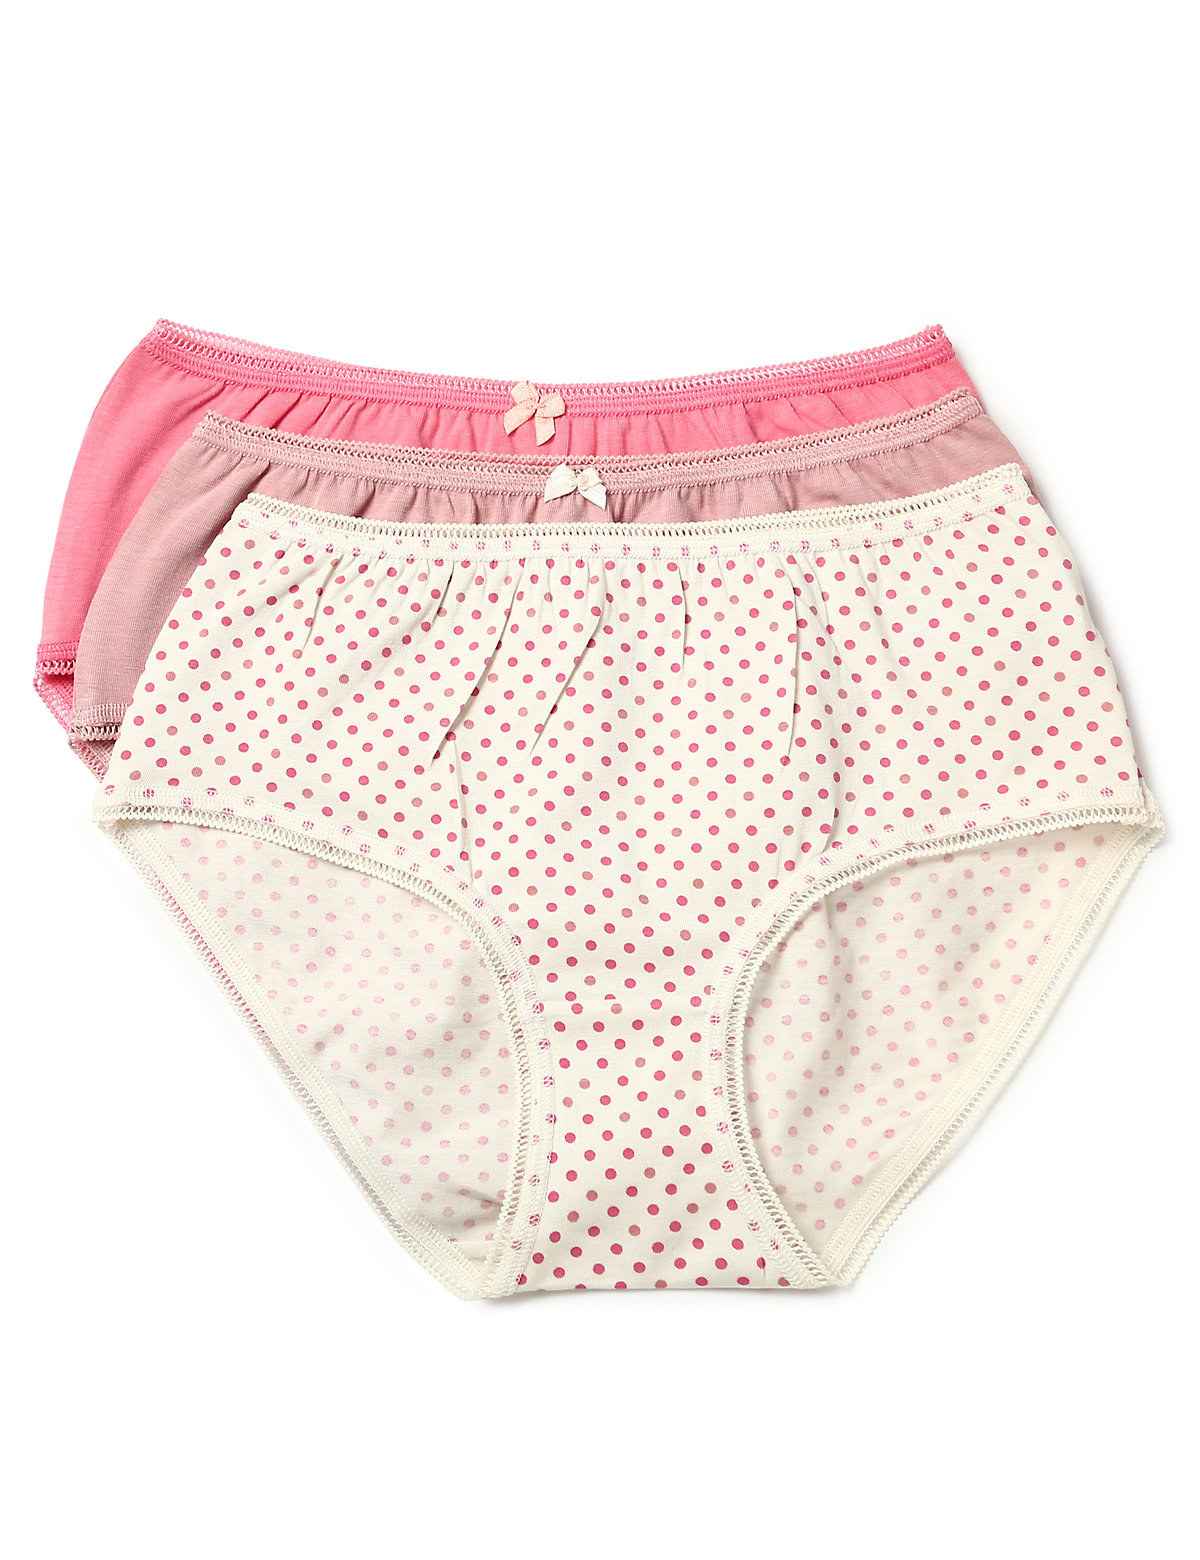 Pack of 3 Cotton Mix Printed Midis Panty